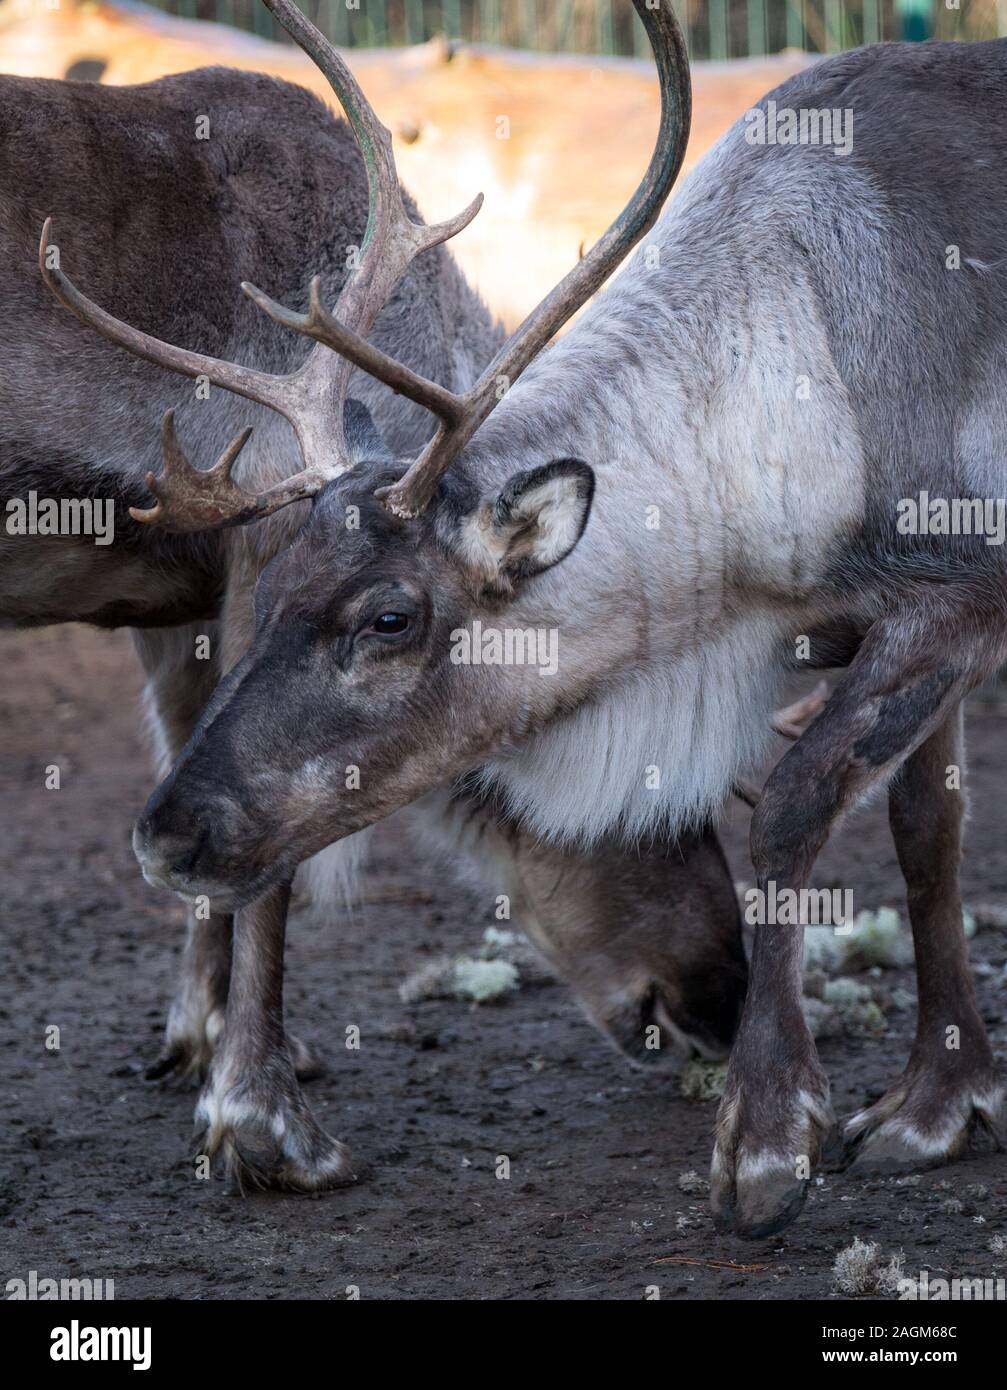 20 December 2019, Saxony-Anhalt, Halle (Saale): Reindeer from the farm on the Goldberg in Halle/Saale walk through the enclosure. A trader from the Finnish village of the Christmas market in Halle brought the animals a treat. The polar moss jäkälä from the Finnish island of Hailouto (2400 kilometres from Halle), is particularly fond of the animals. The reindeer come from Halle's Finnish twin city Oulu. Photo: Hendrik Schmidt/dpa-Zentralbild/ZB Stock Photo